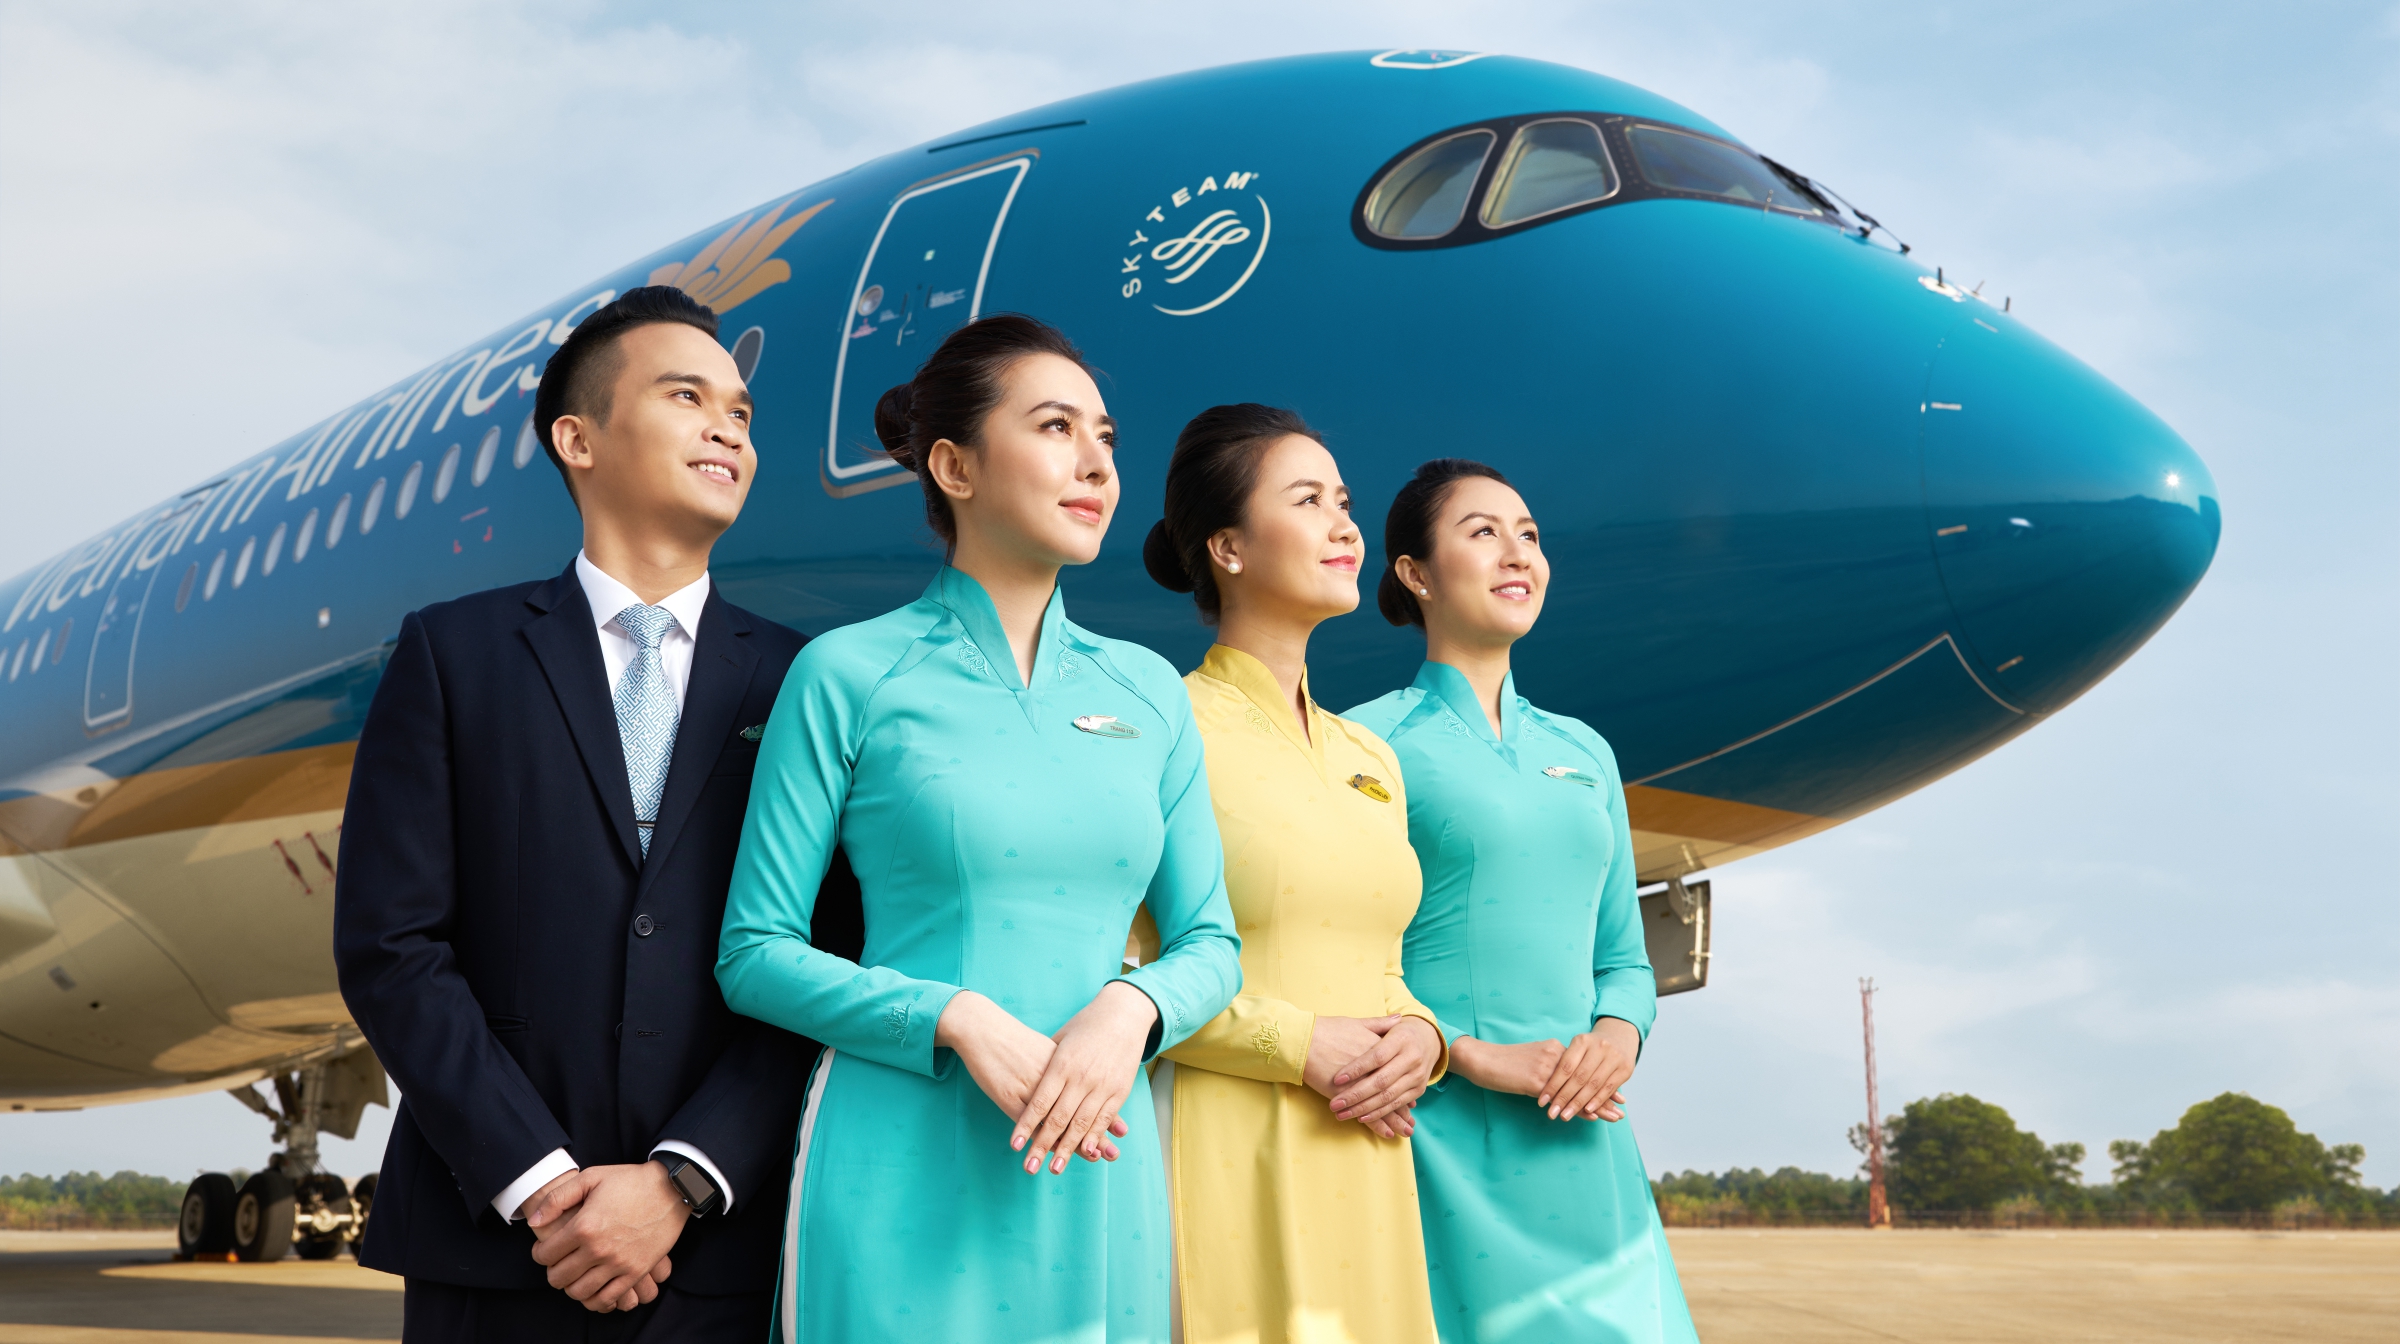 Vietnam Airlines was among the top 3 most progressive airlines in the world in 2016